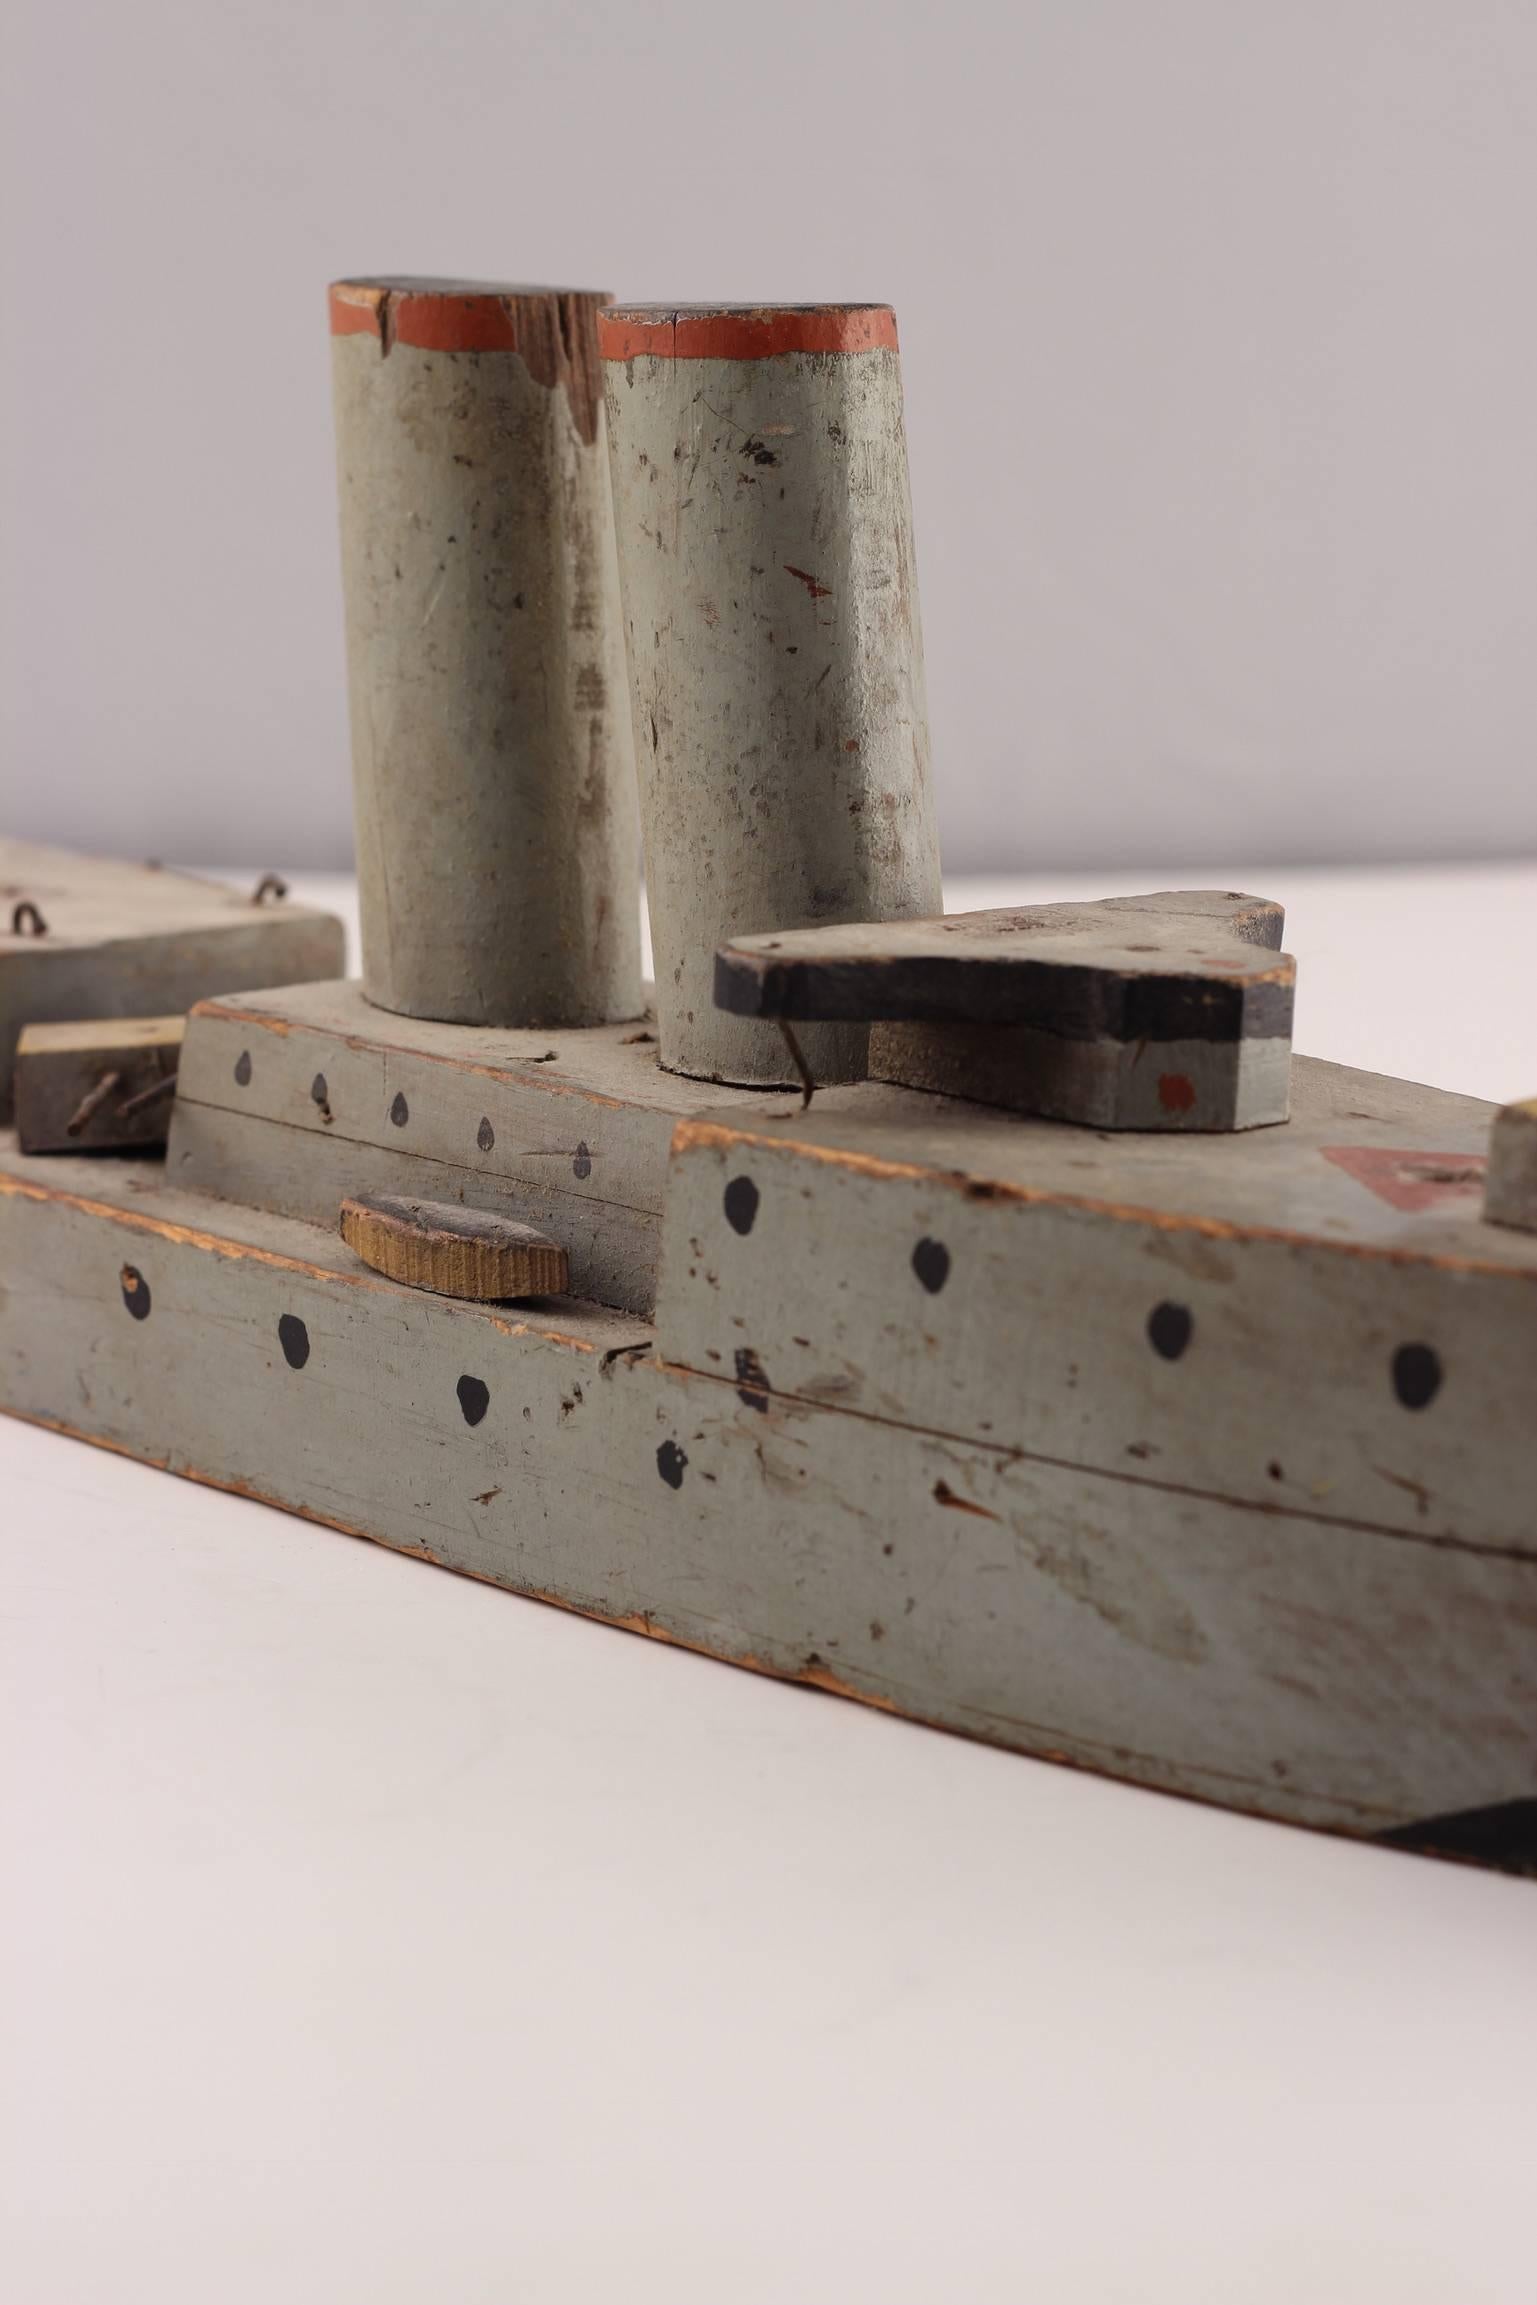 A piece of social history from the end of the Second World War. This Toy Folk Art Battle Ship was made towards the end of the Second World War by an Italian prisoner of war and has been passed down through generations of an English Family. It is